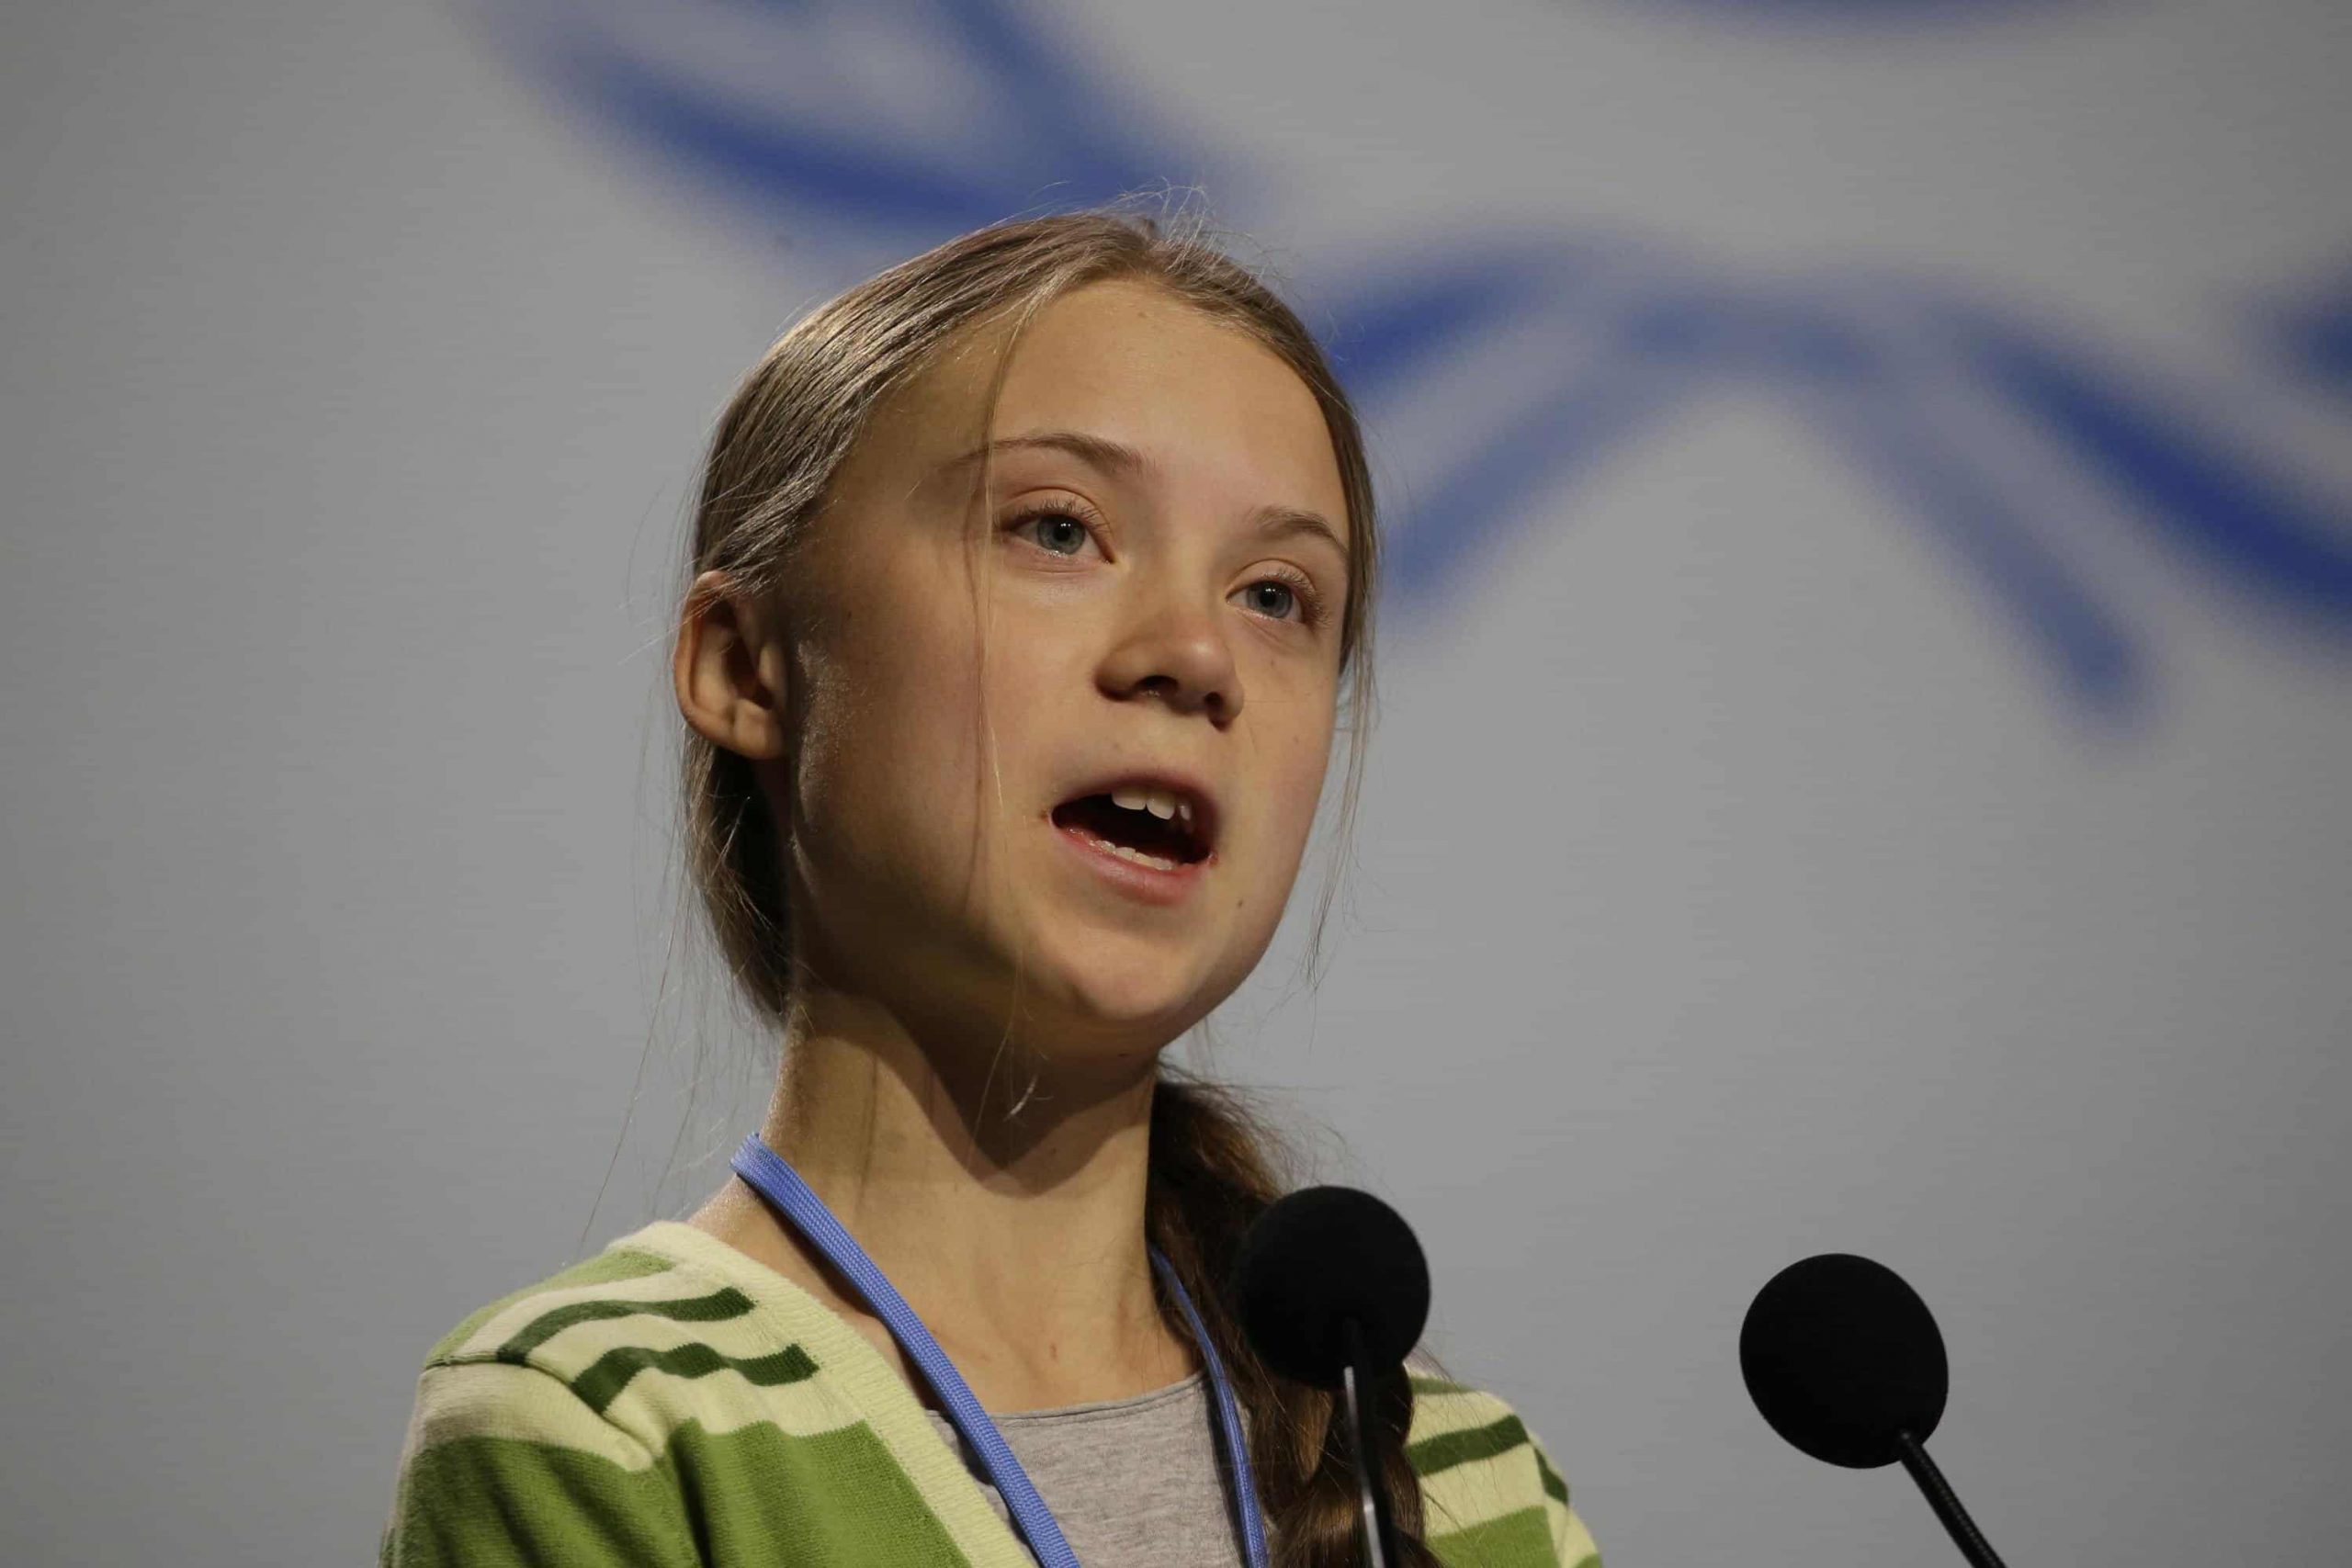 Greta Thunberg named Person of the Year by Time magazine